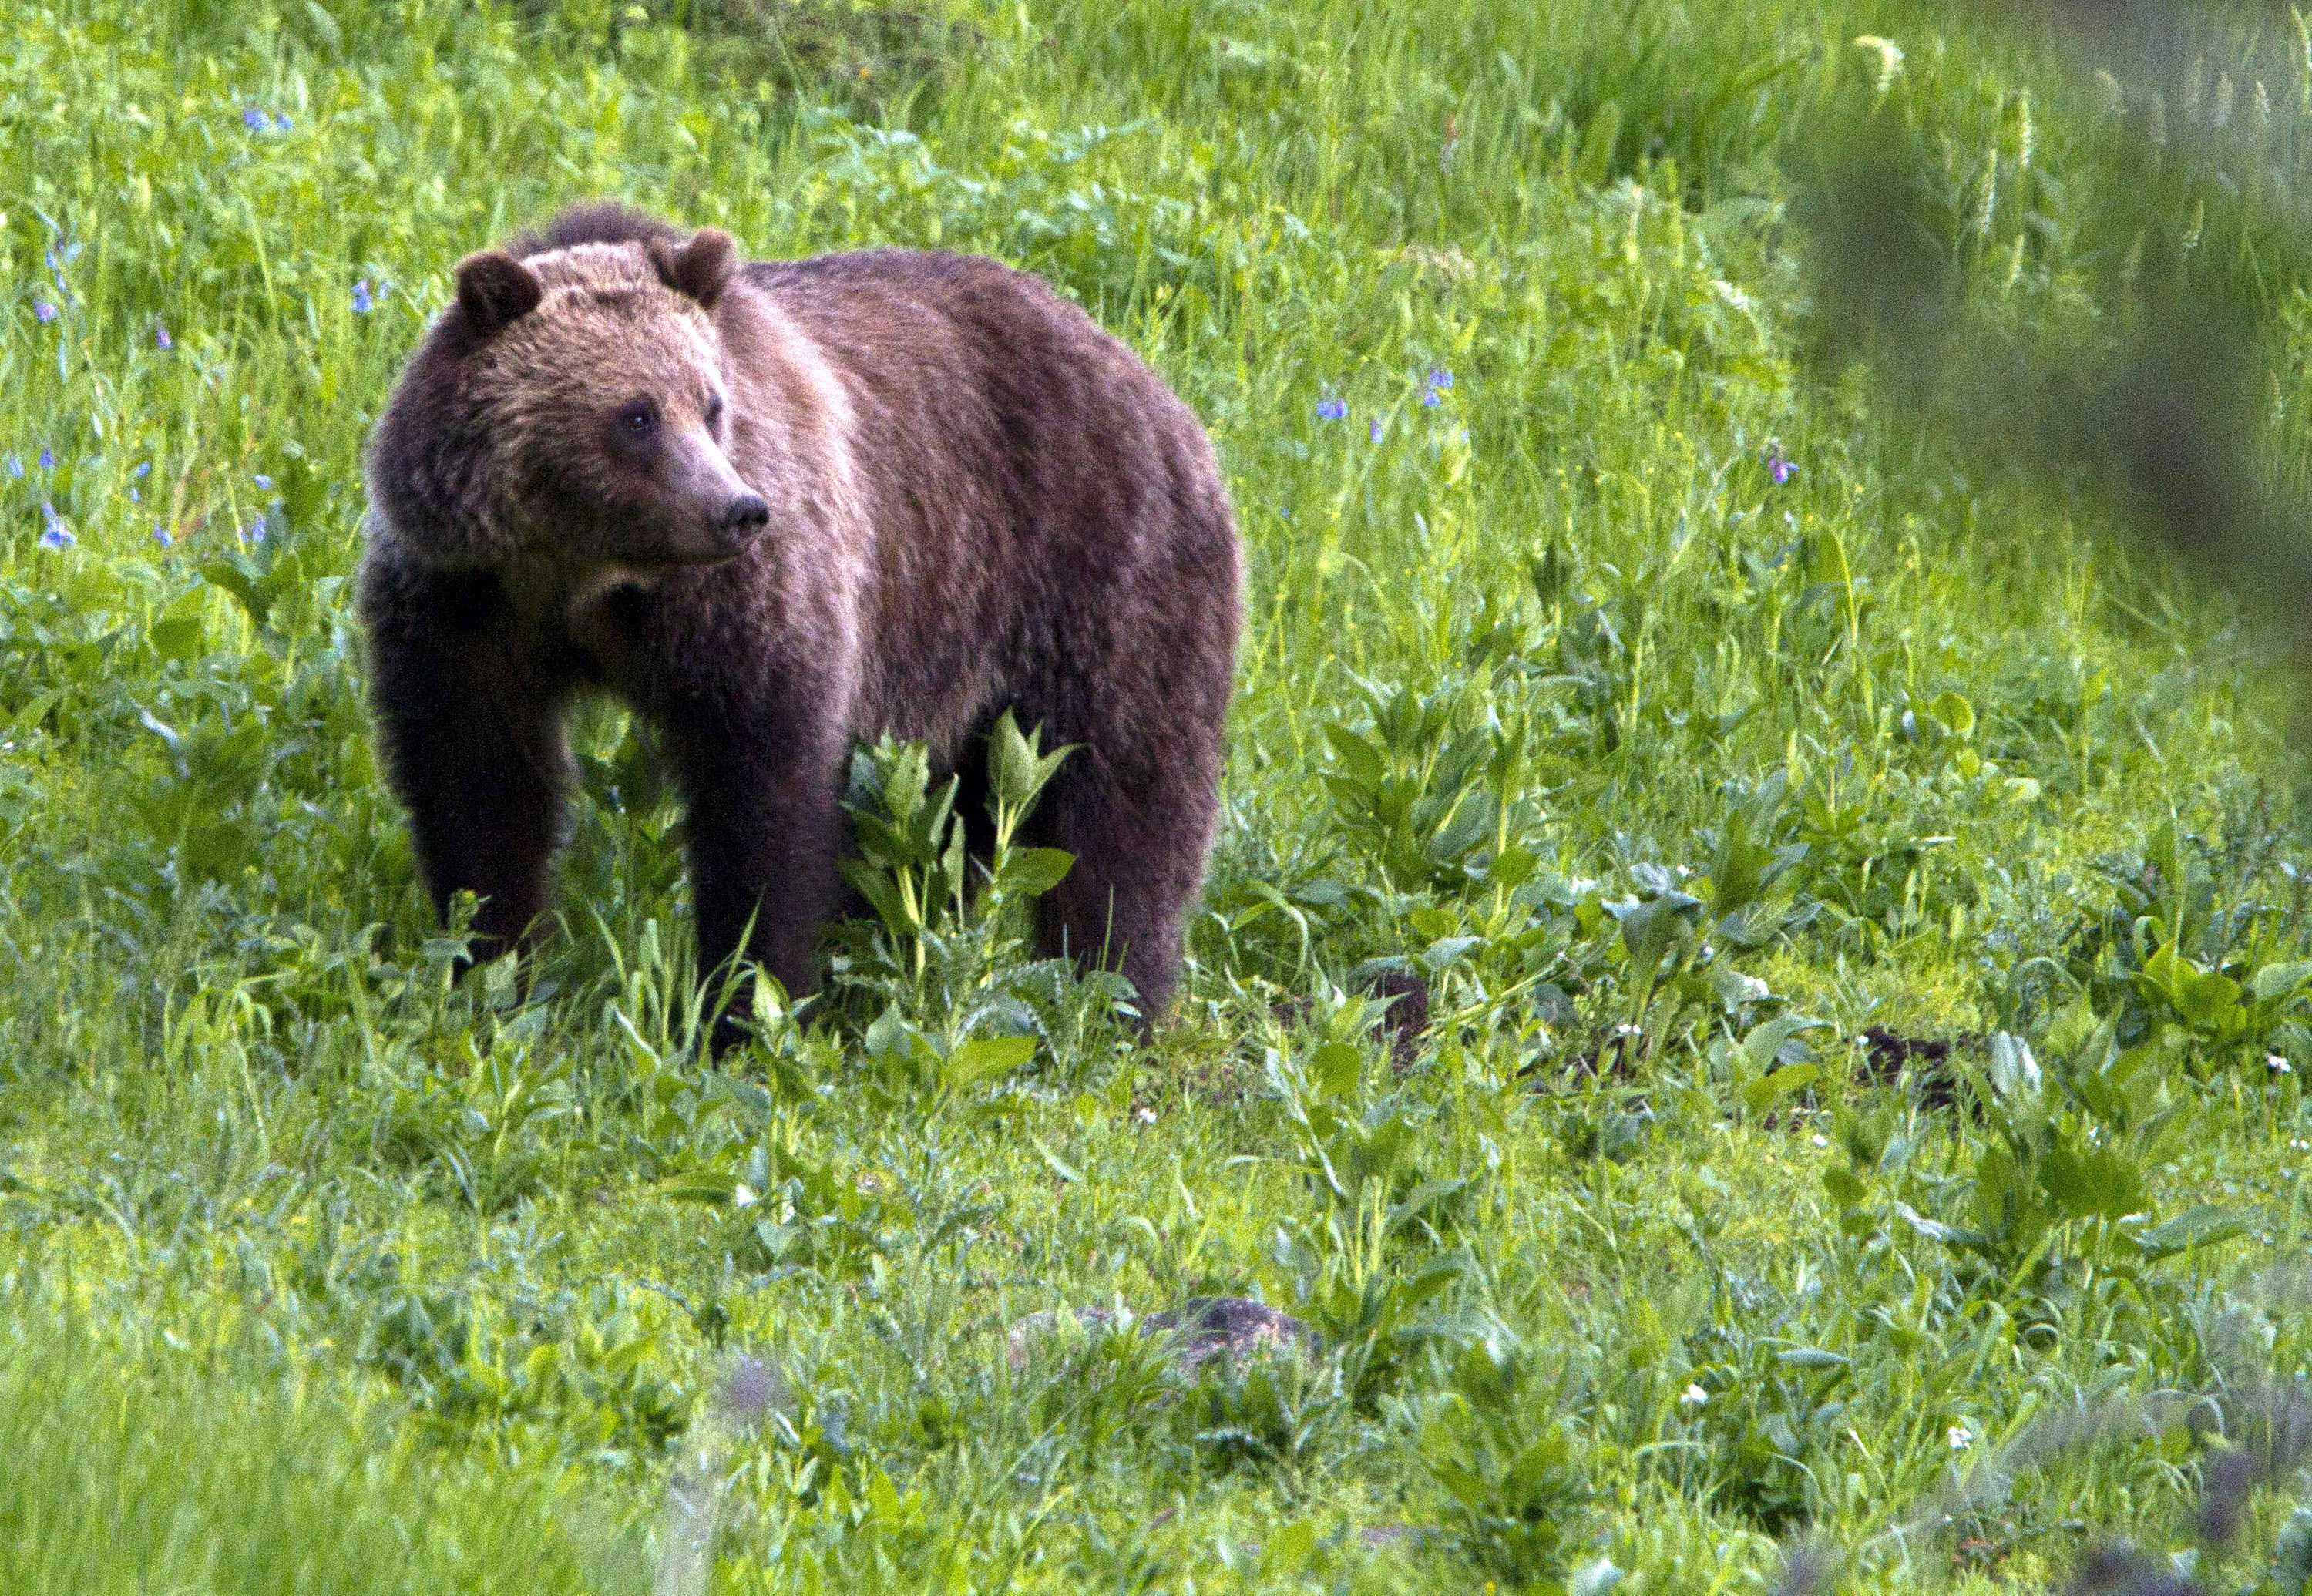 US officials to lift Yellowstone grizzly bear protections